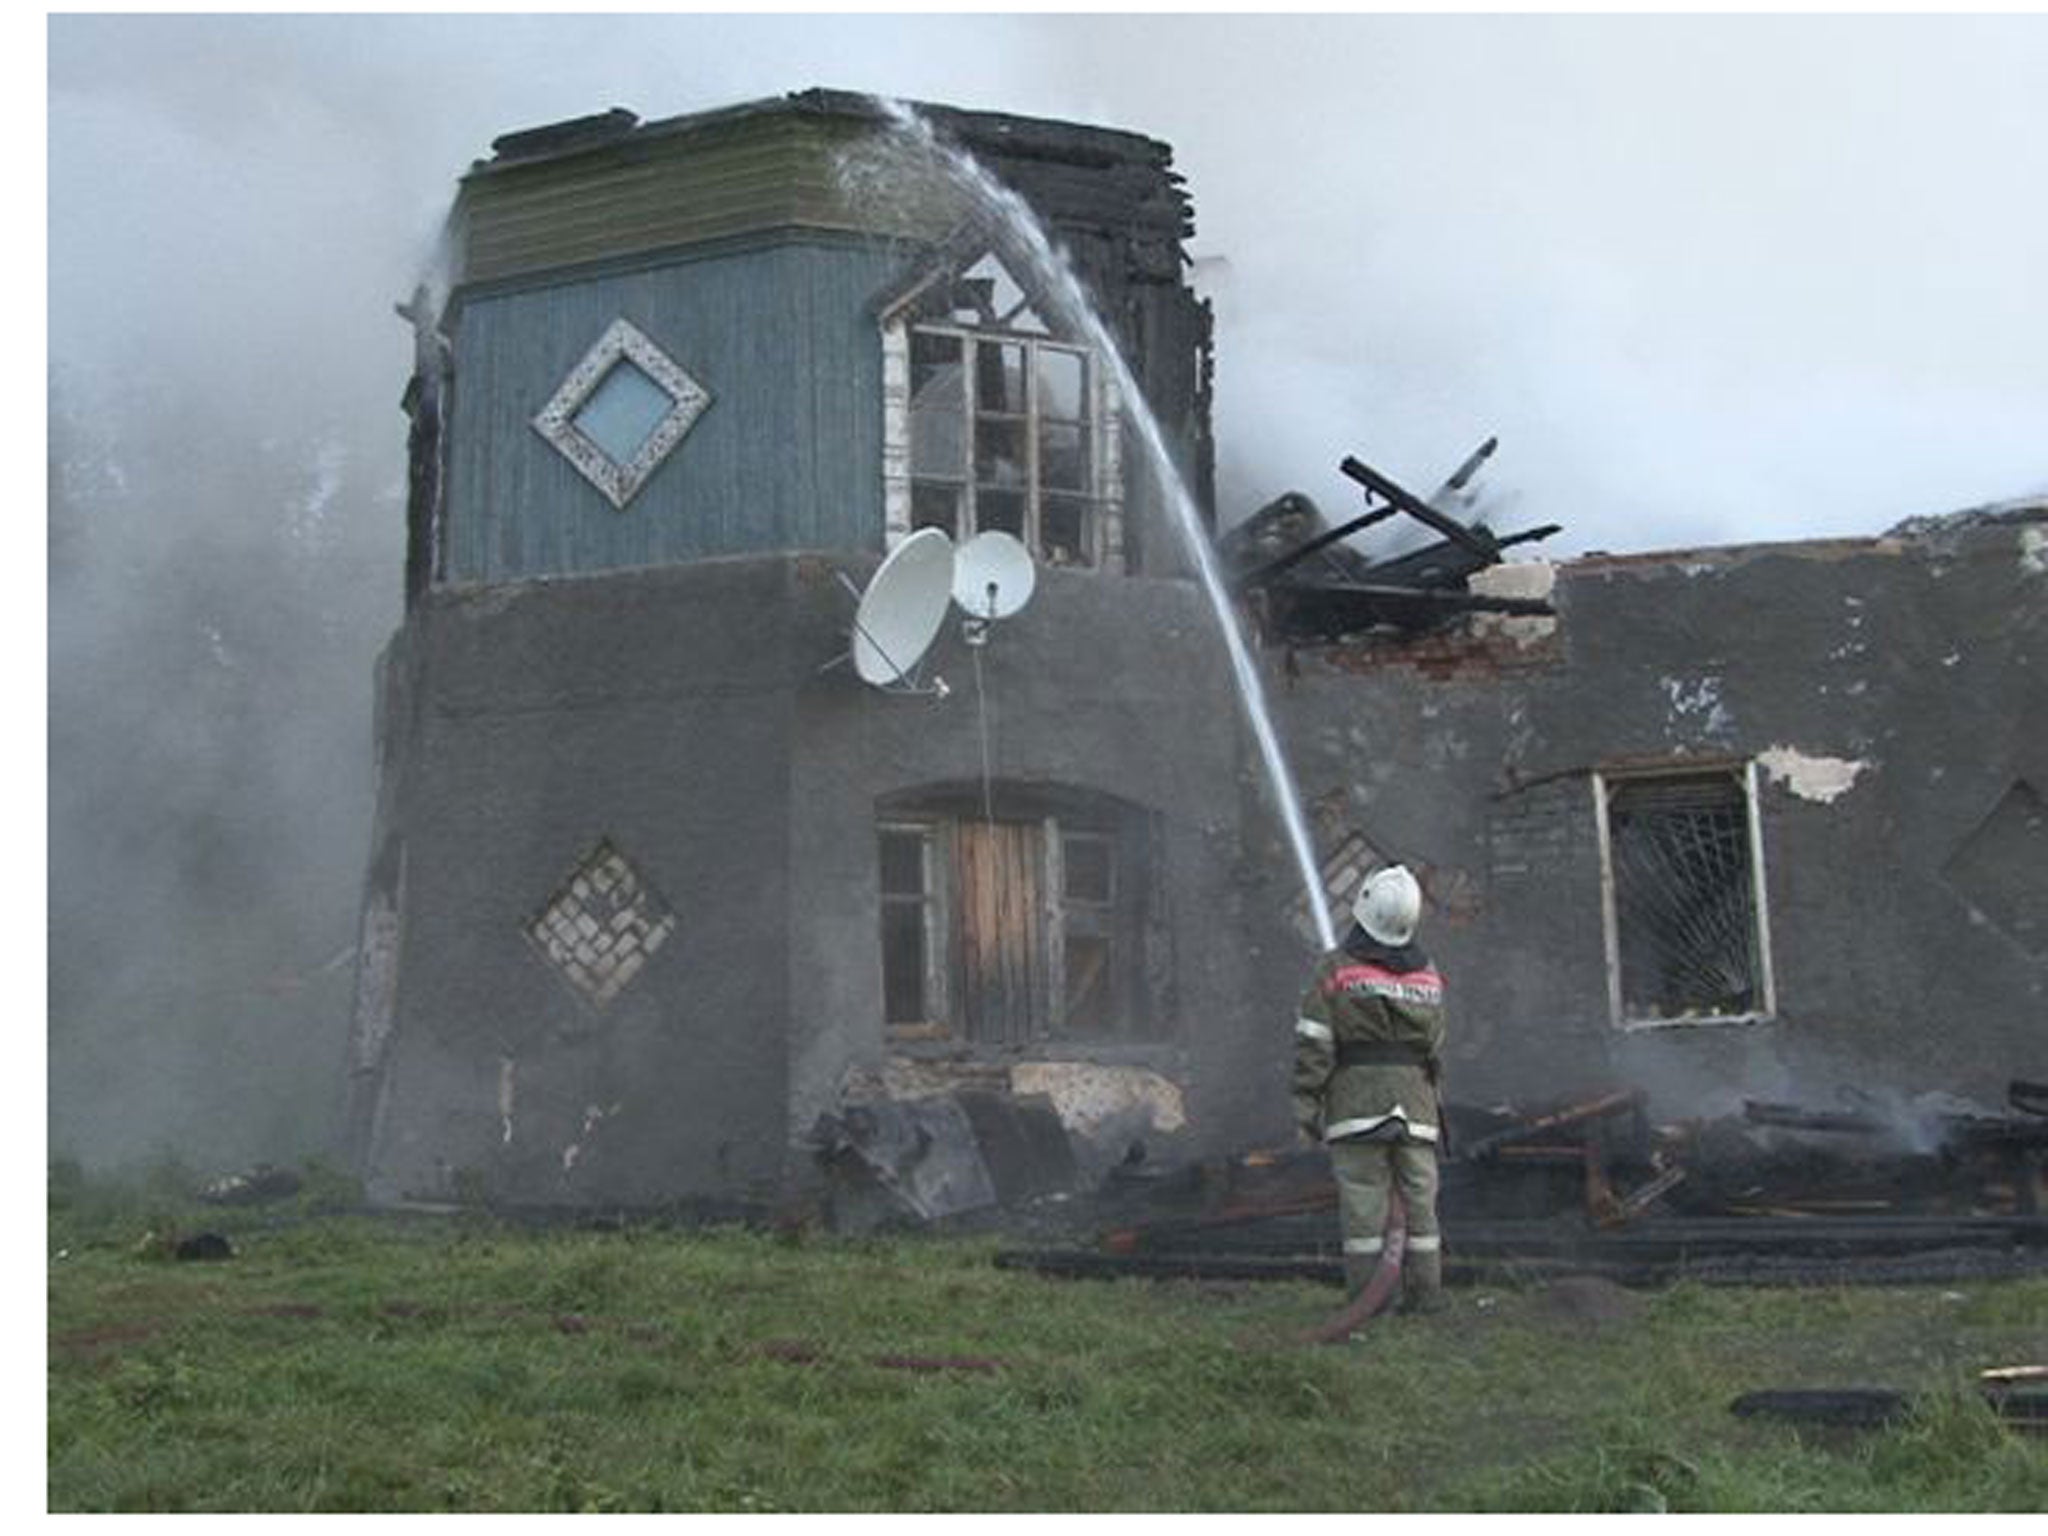 A psychiatric hospital was destroyed by fire in the Novgorod region town of Luka.